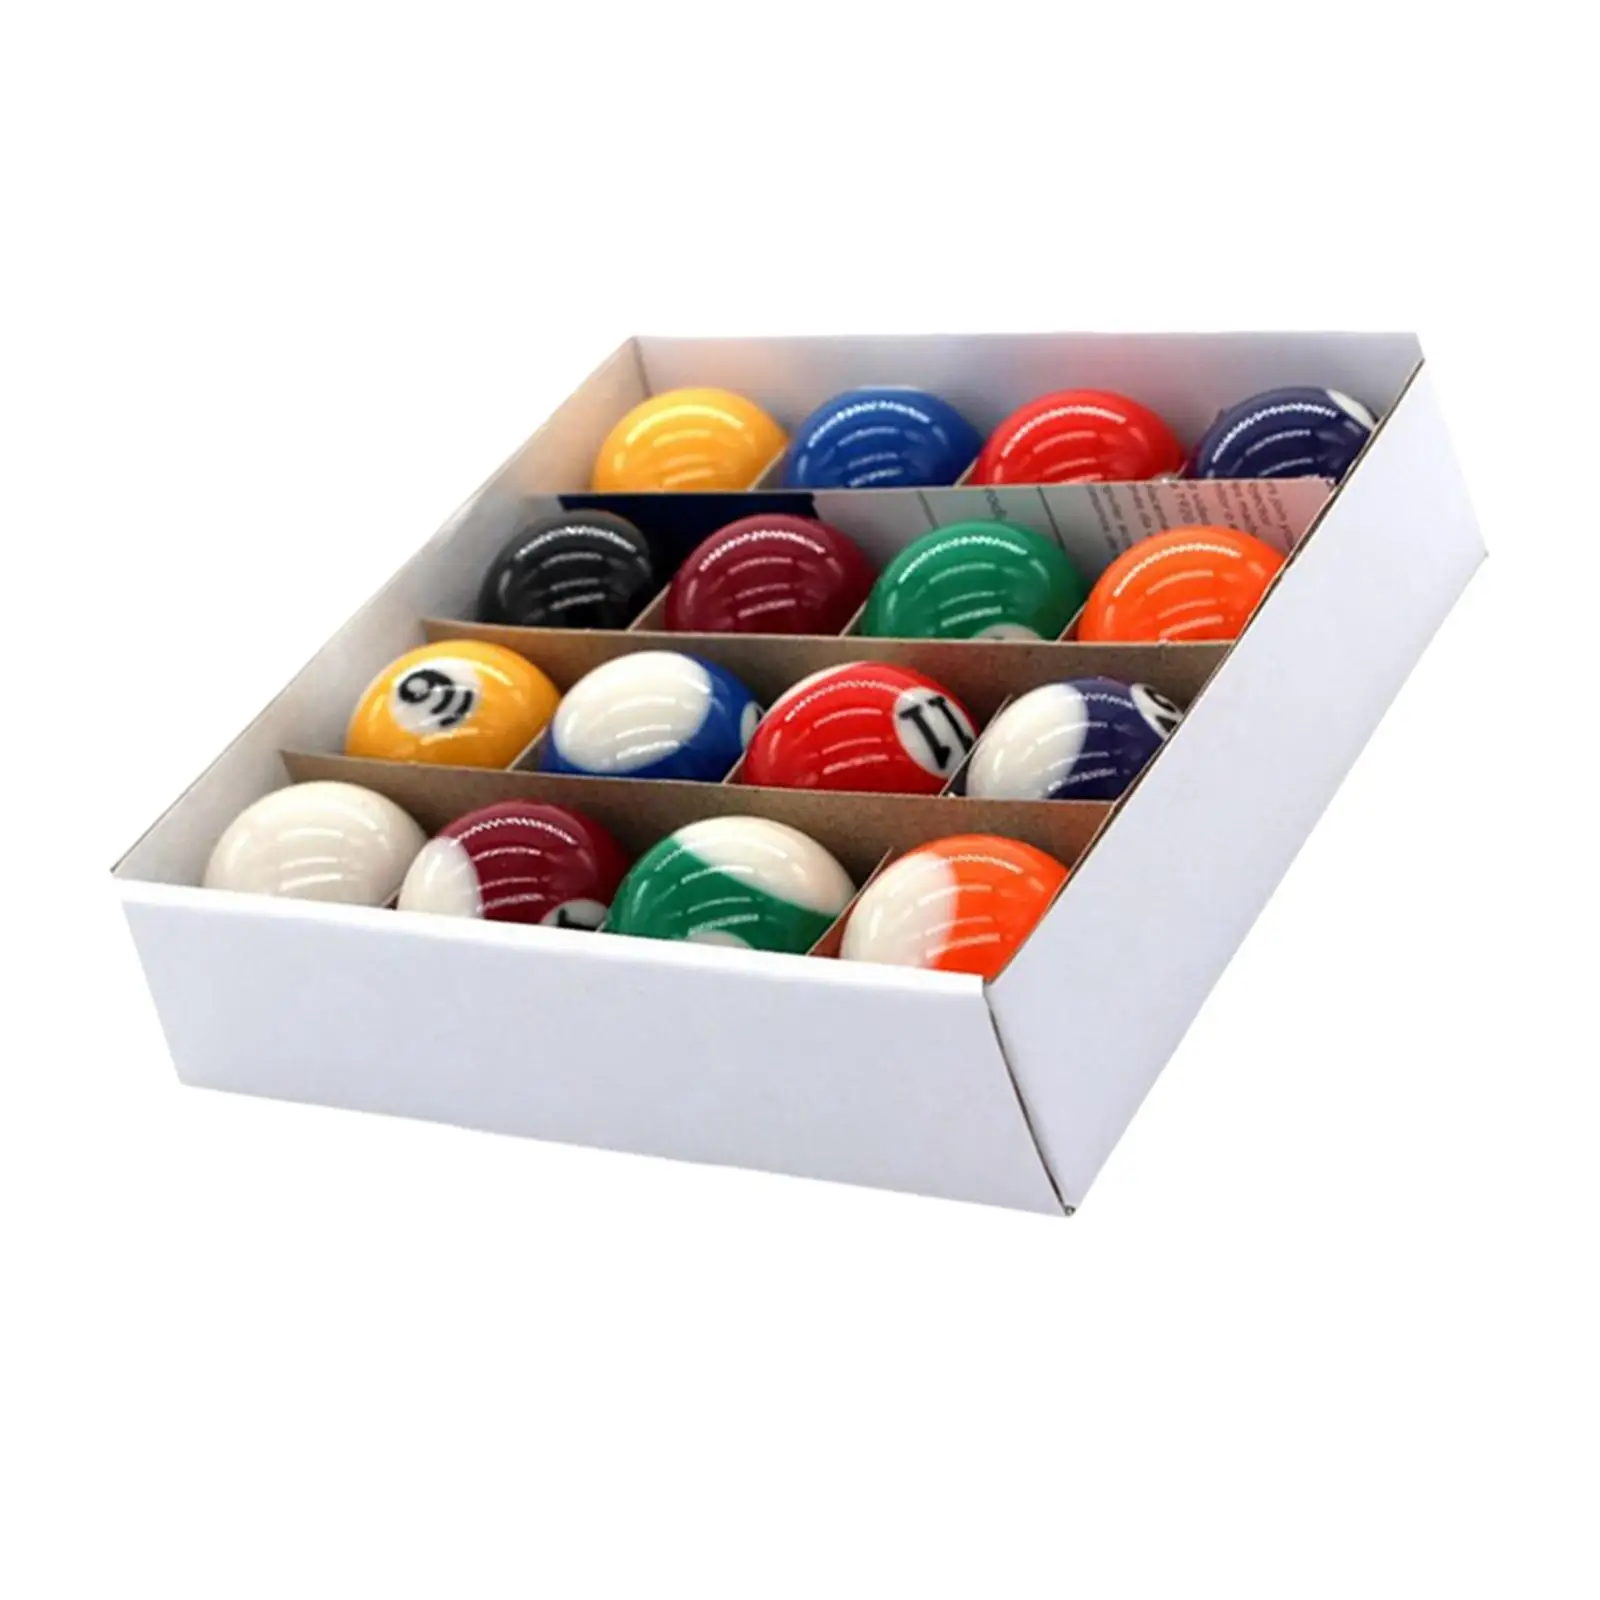 16 Pieces Mini Billiard Balls Set Resin Pool Table Balls Eco Friendly Training Toys for Game Rooms Leisure Sports Accessories